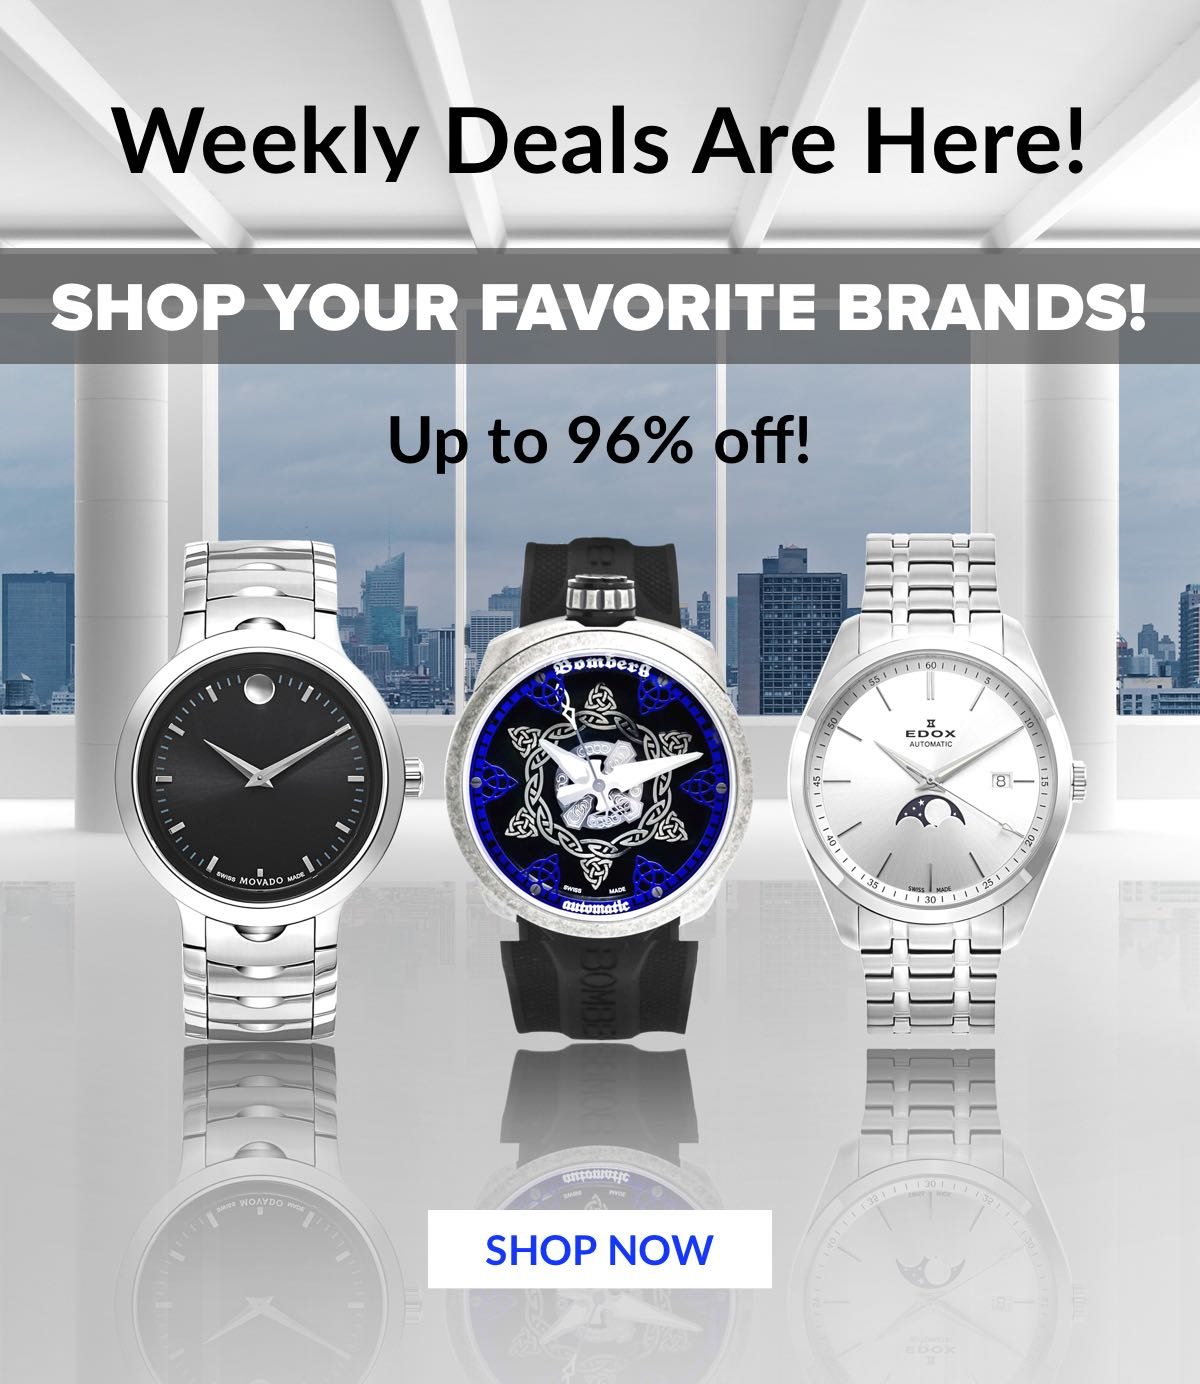 Weekly Deals Are Here! Shop your favorite brands at up to 96% off!